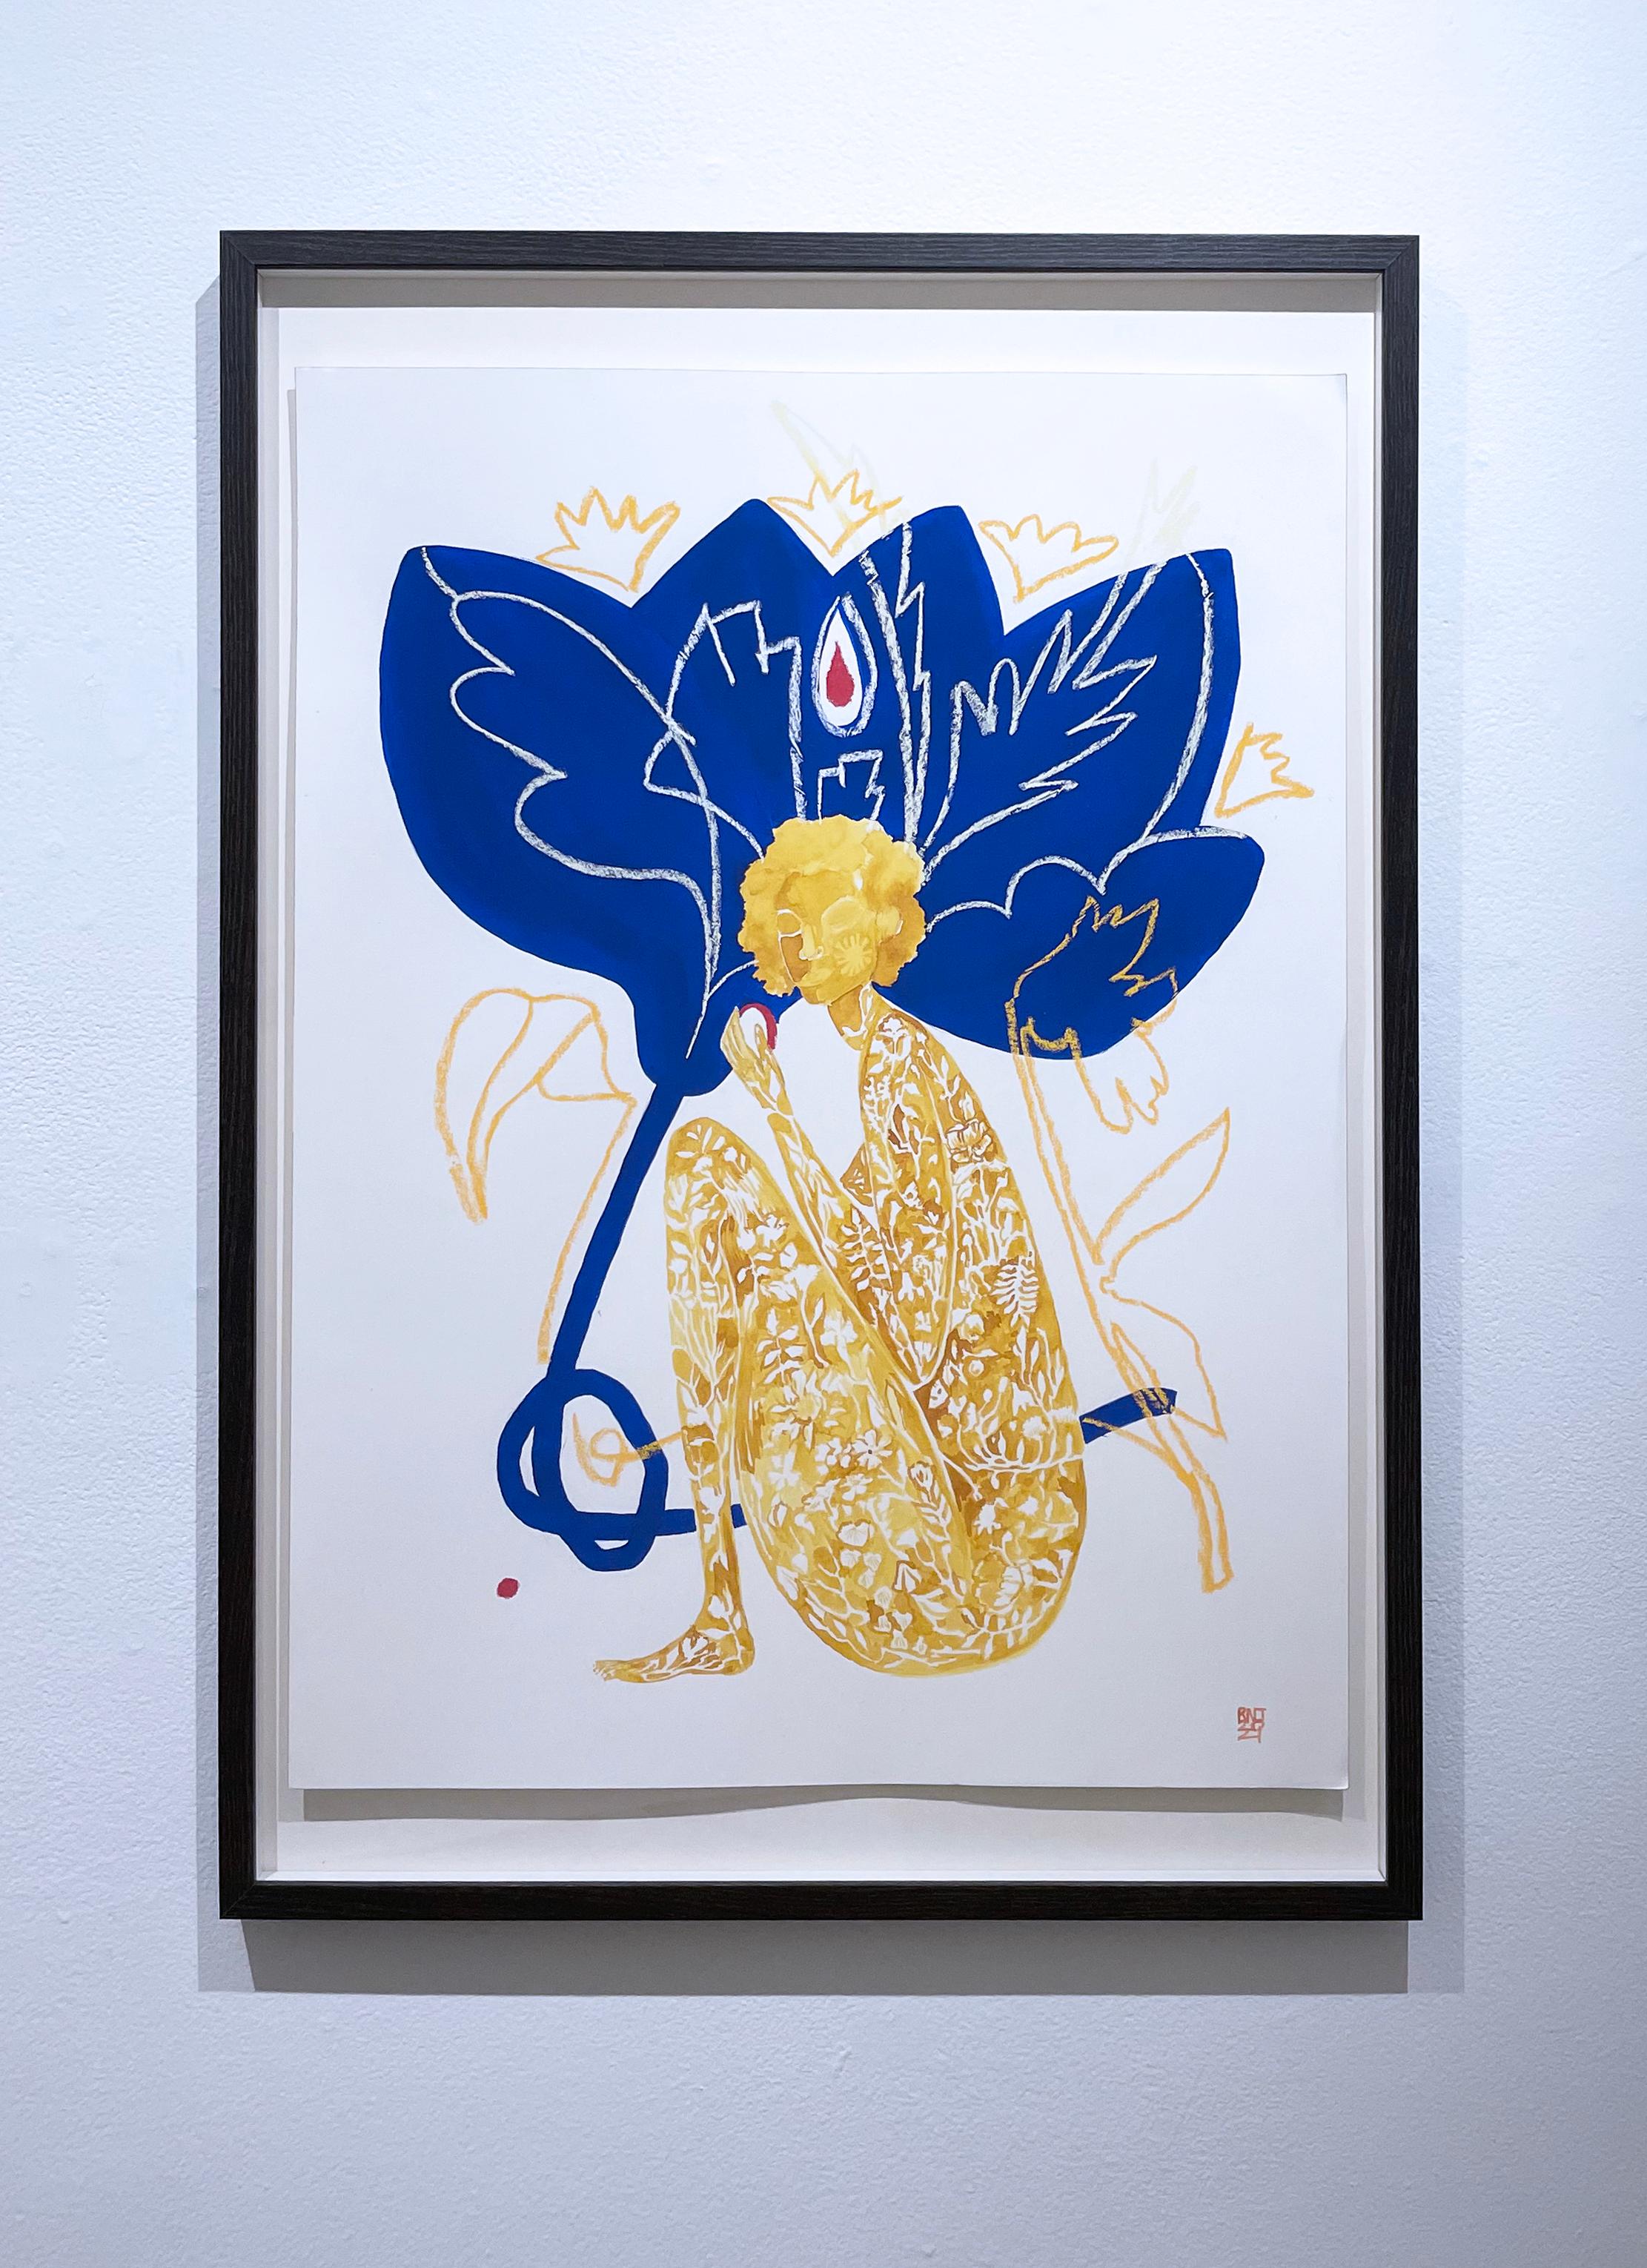 Water the Flowers, 2021, female figure & plants, leaves, blue & gold painting - Painting by Rebecca Johnson